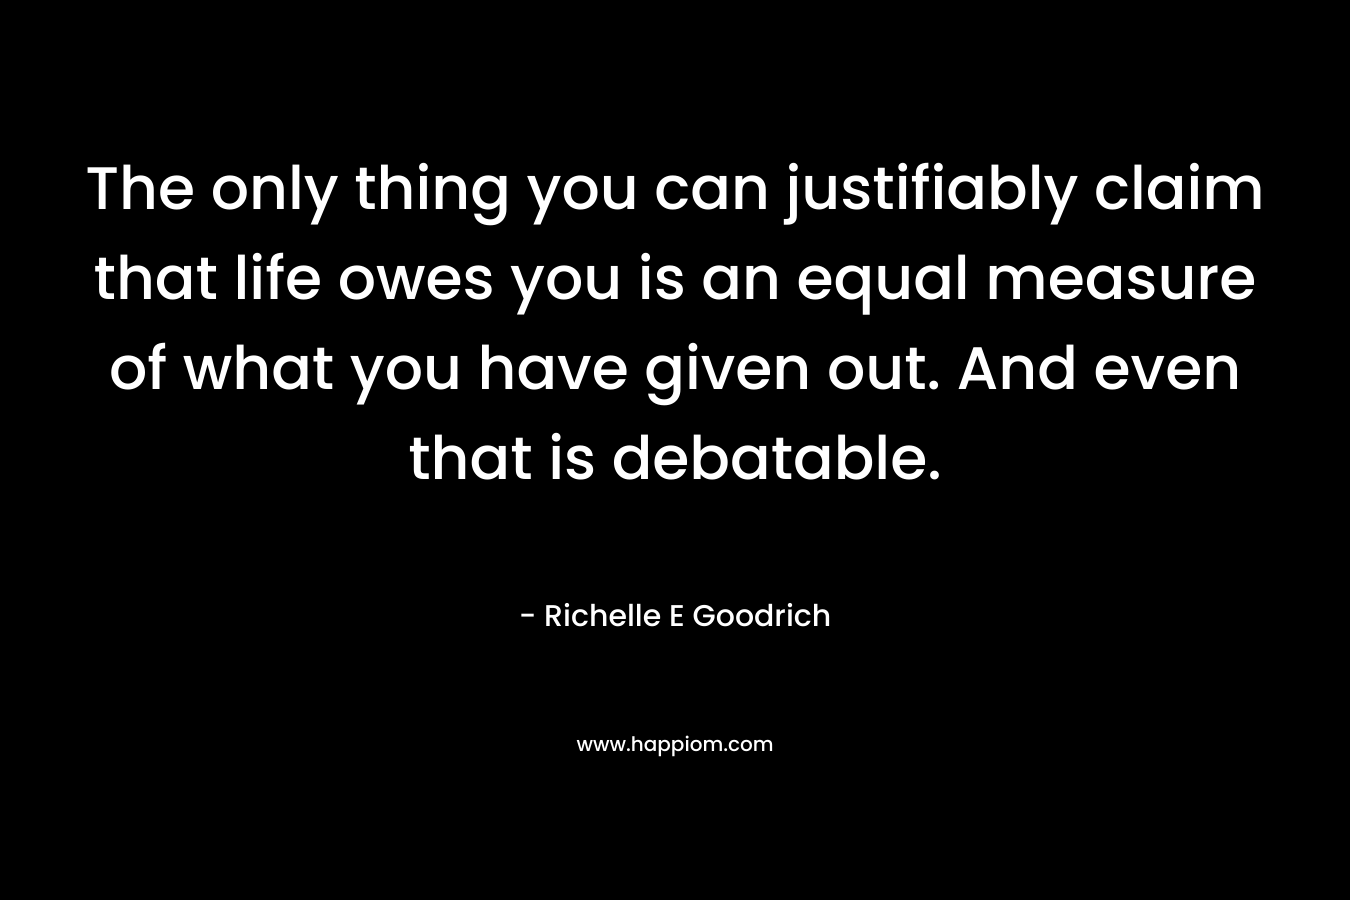 The only thing you can justifiably claim that life owes you is an equal measure of what you have given out. And even that is debatable. – Richelle E Goodrich